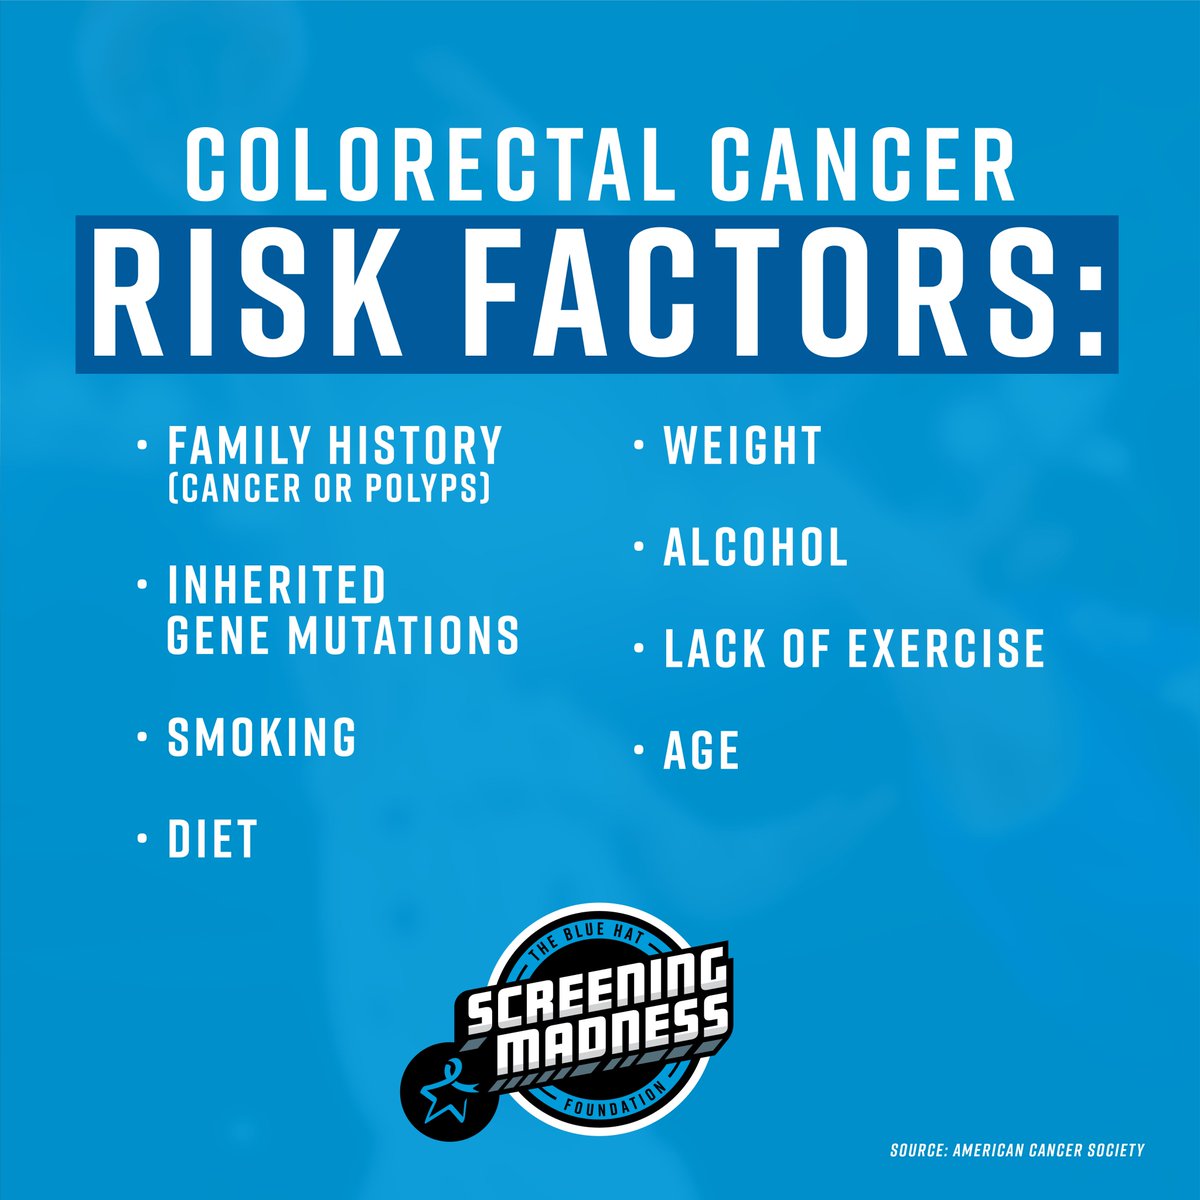 March is #ColorectalCancerAwarenessMonth! Colorectal cancer is preventable, treatable, and beatable with early detection. We’re teaming up with @BigTenCRC and @BlueHats4colons to encourage screening. Make the pledge today!  bigtencrc.org/screeningmadne… #ScreeningMadness